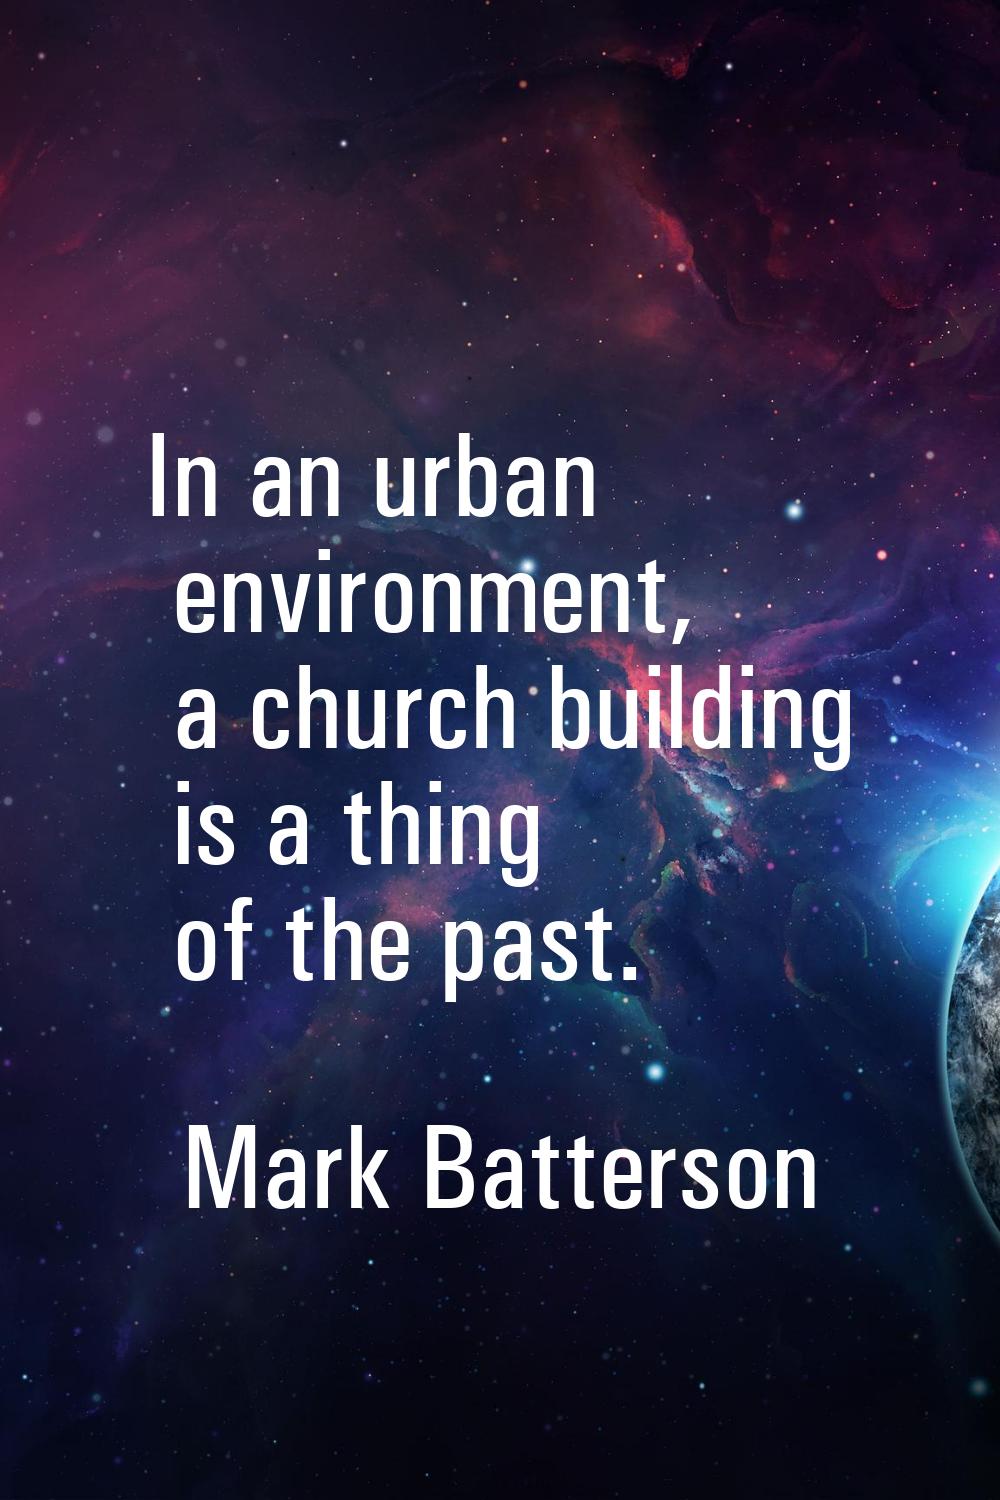 In an urban environment, a church building is a thing of the past.